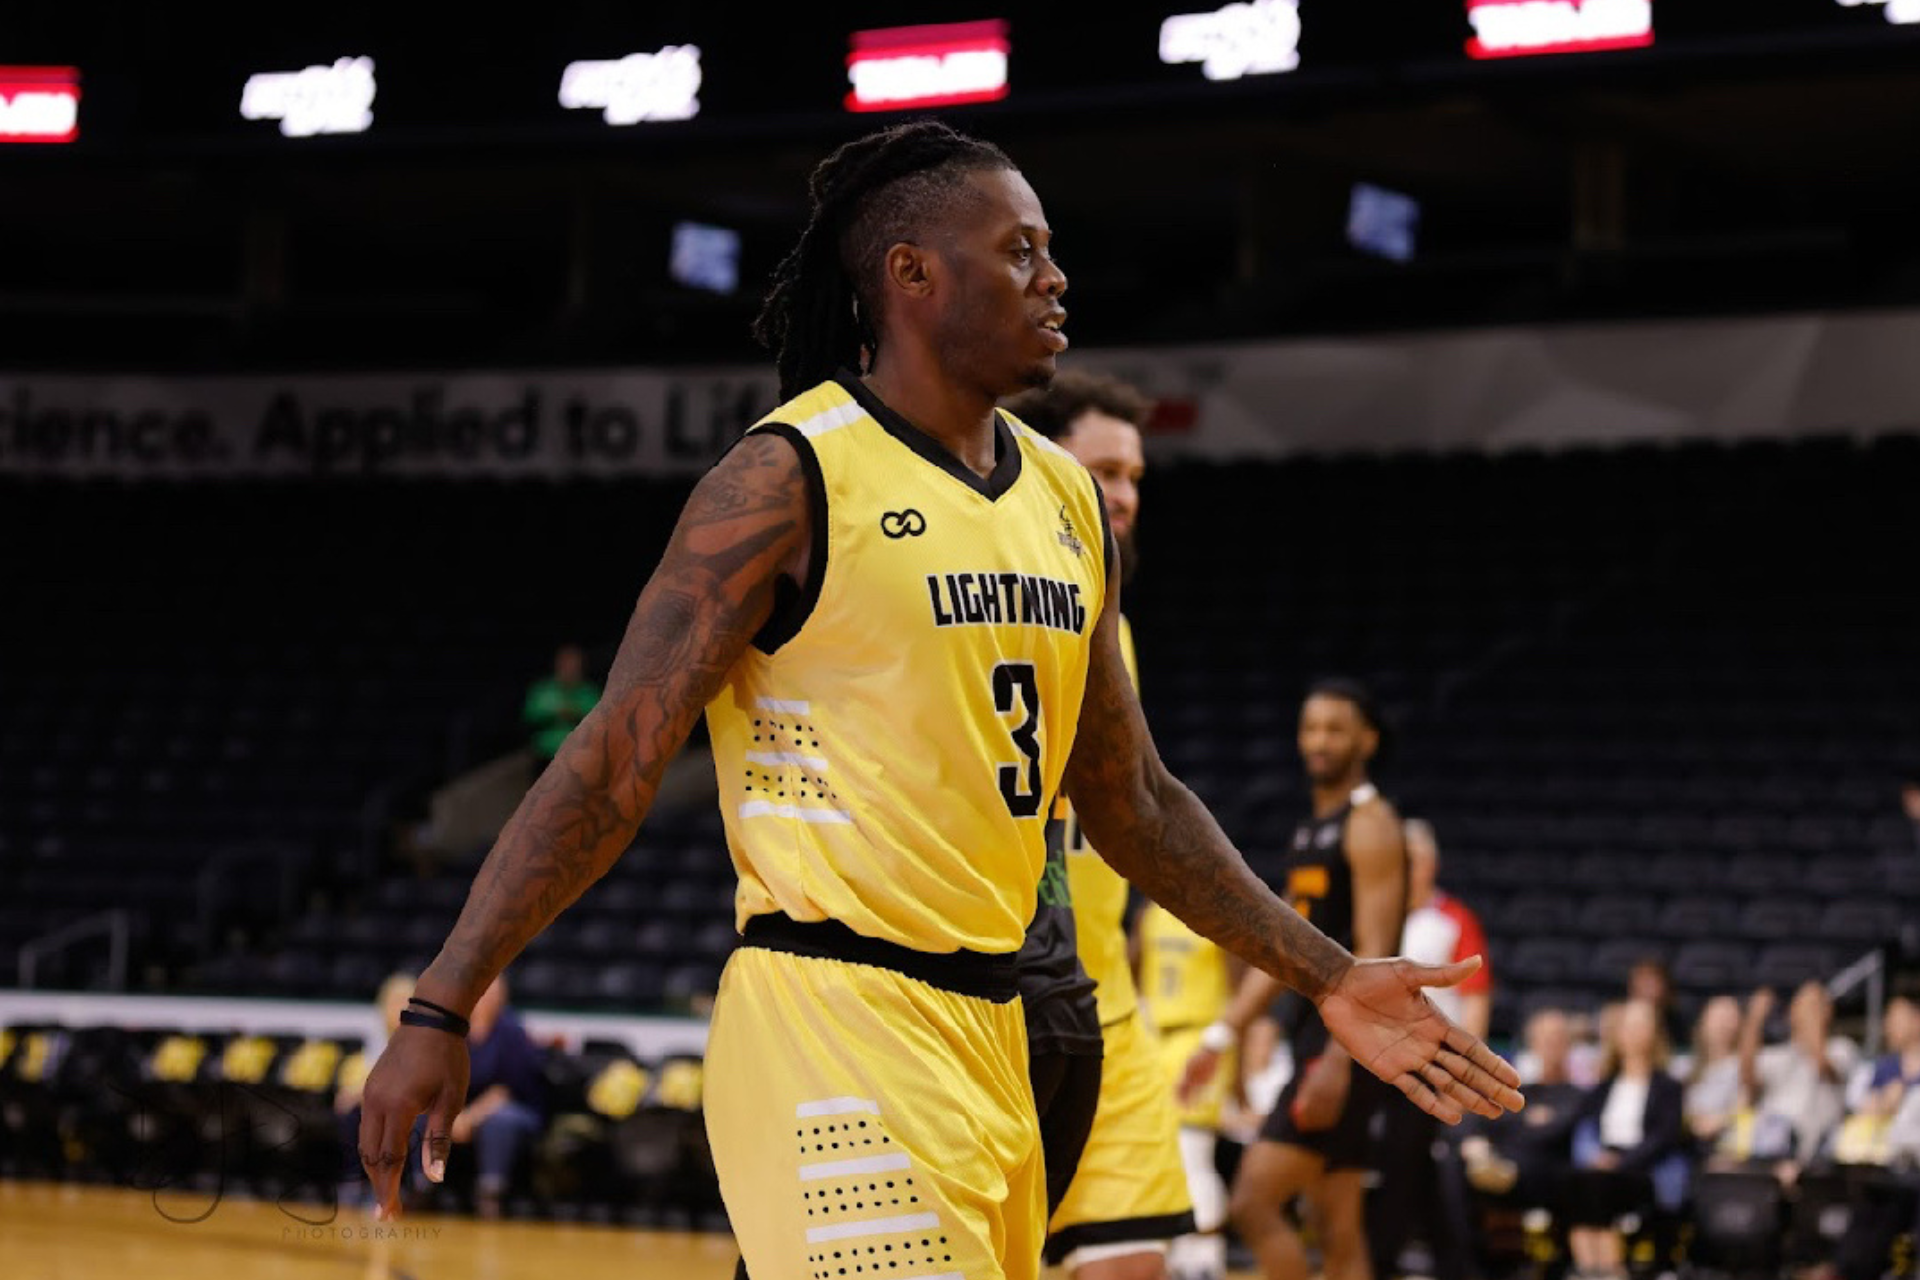 London Lightning Advances in BSL Semifinals with Another W Over The Sudbury 5